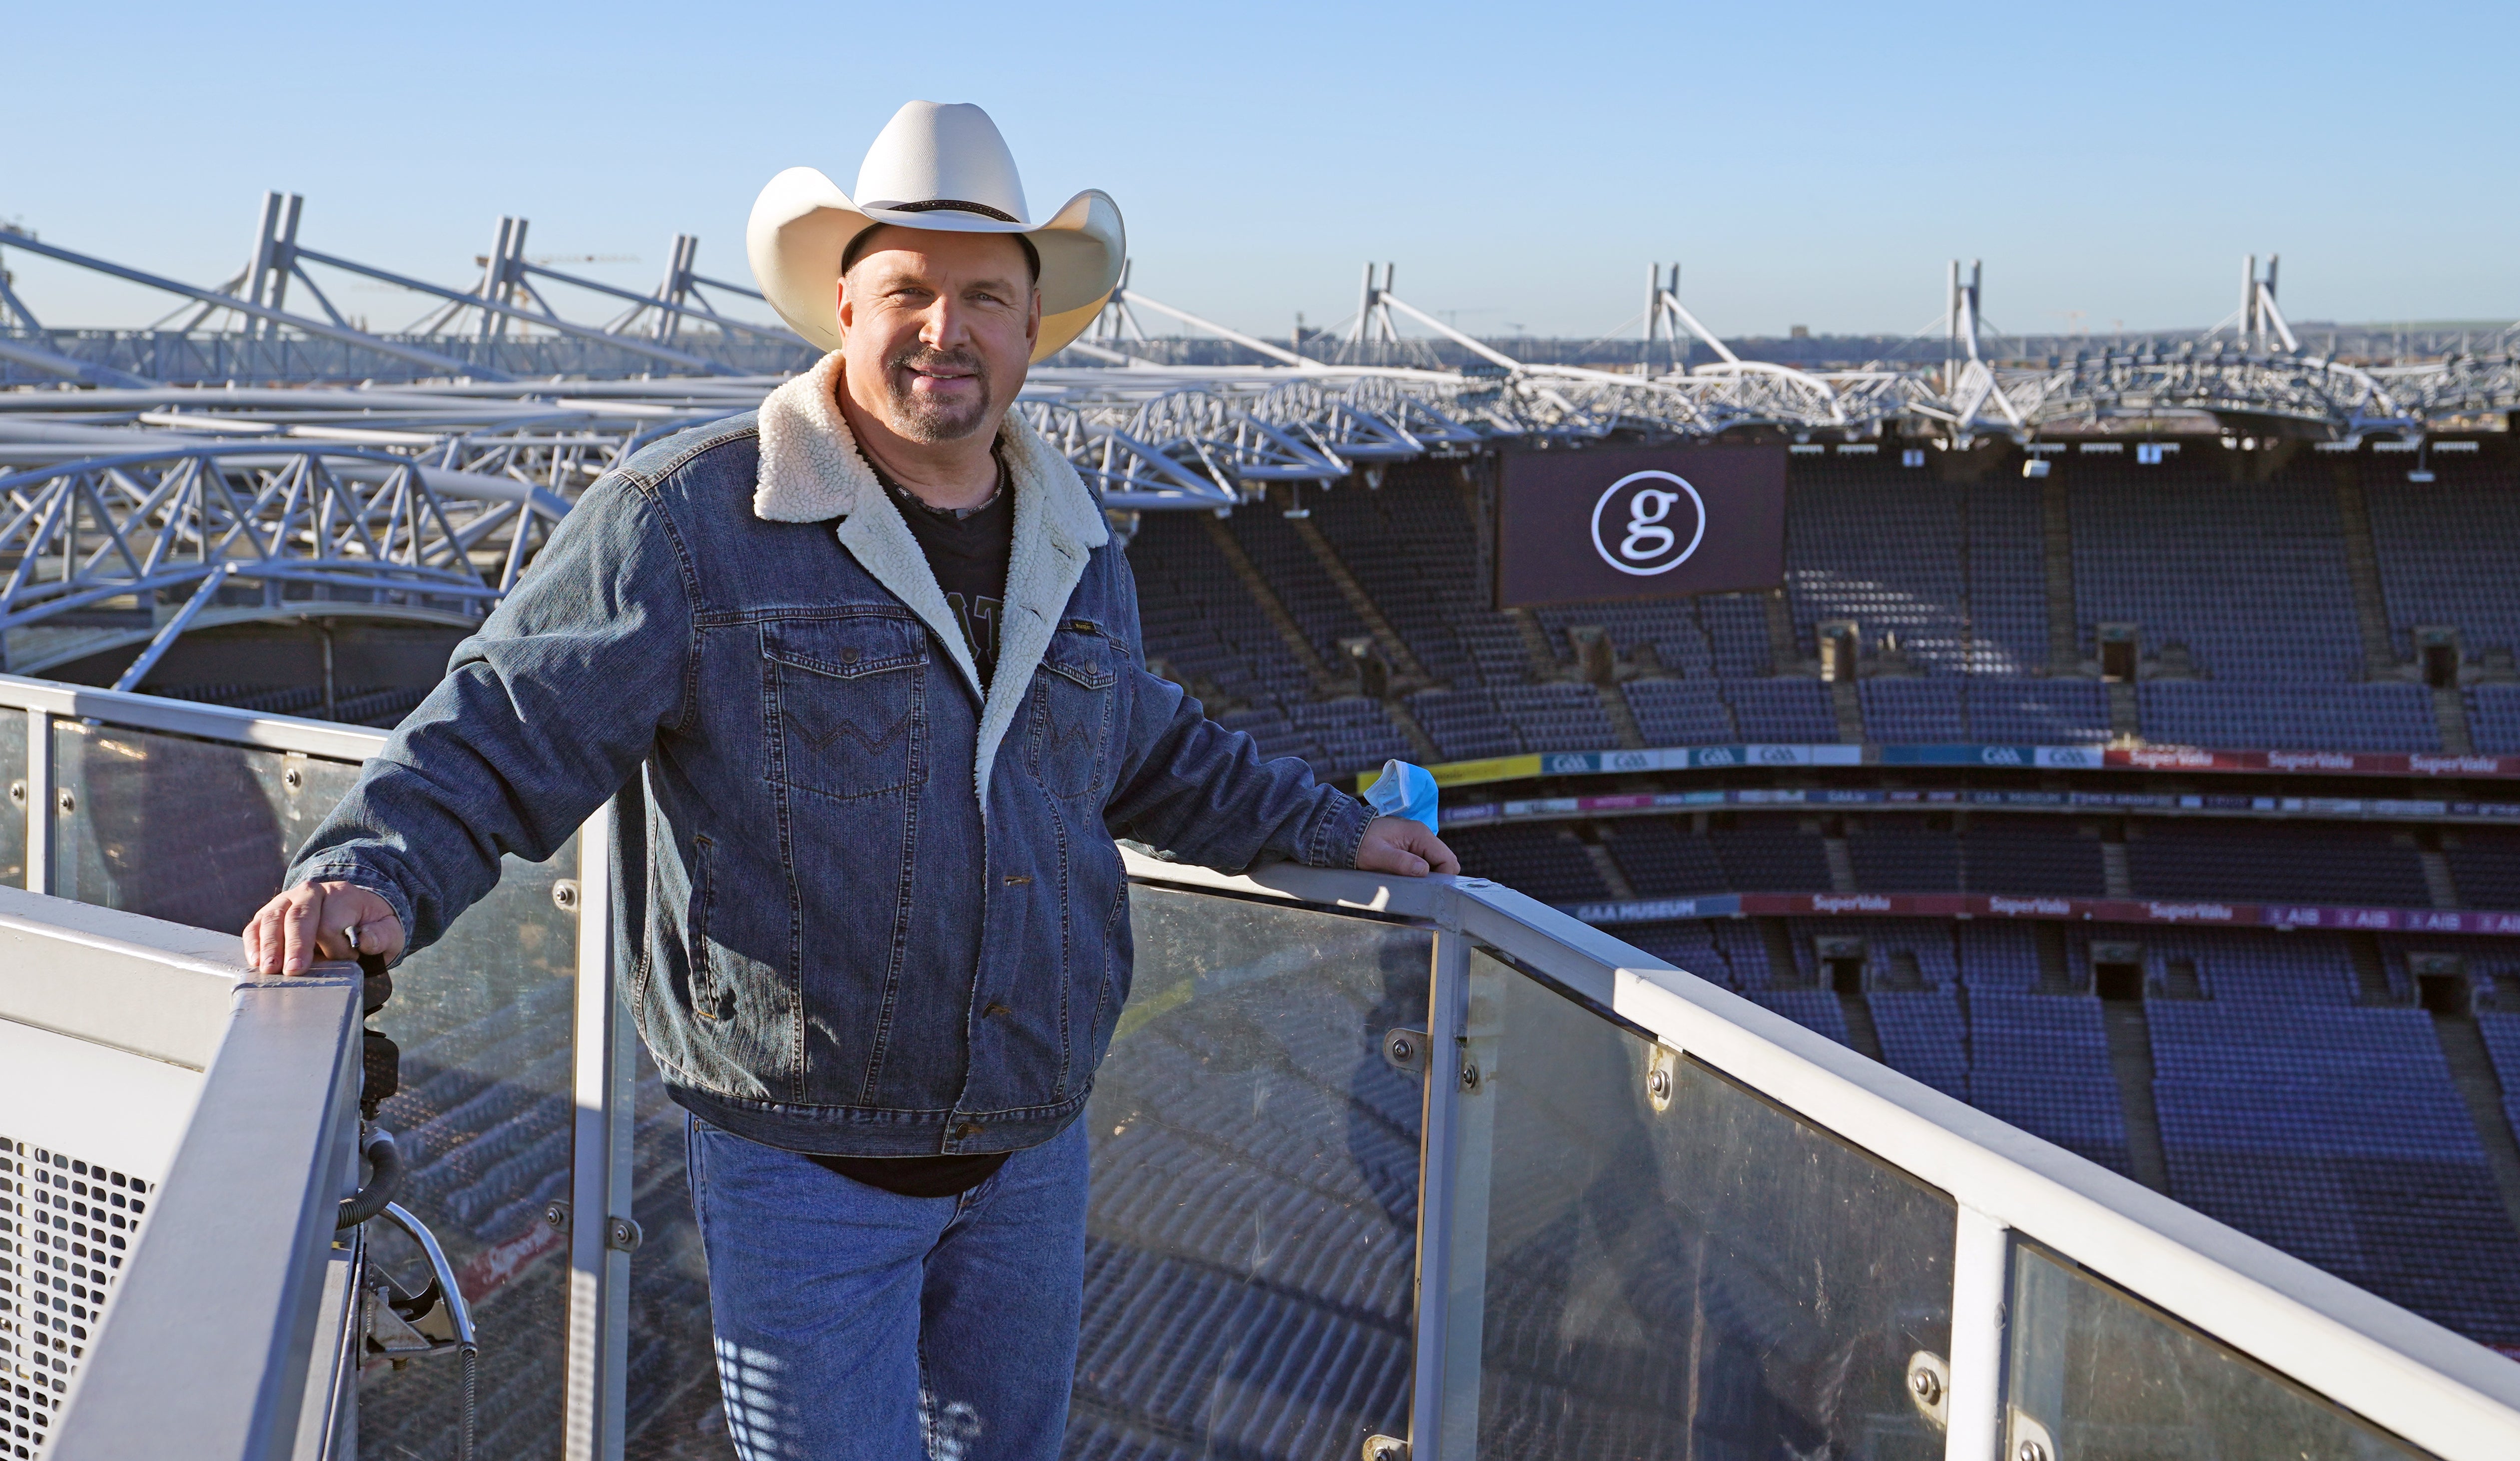 Country music star Garth Brooks on the roof of Croke Park in Dublin (/PA)